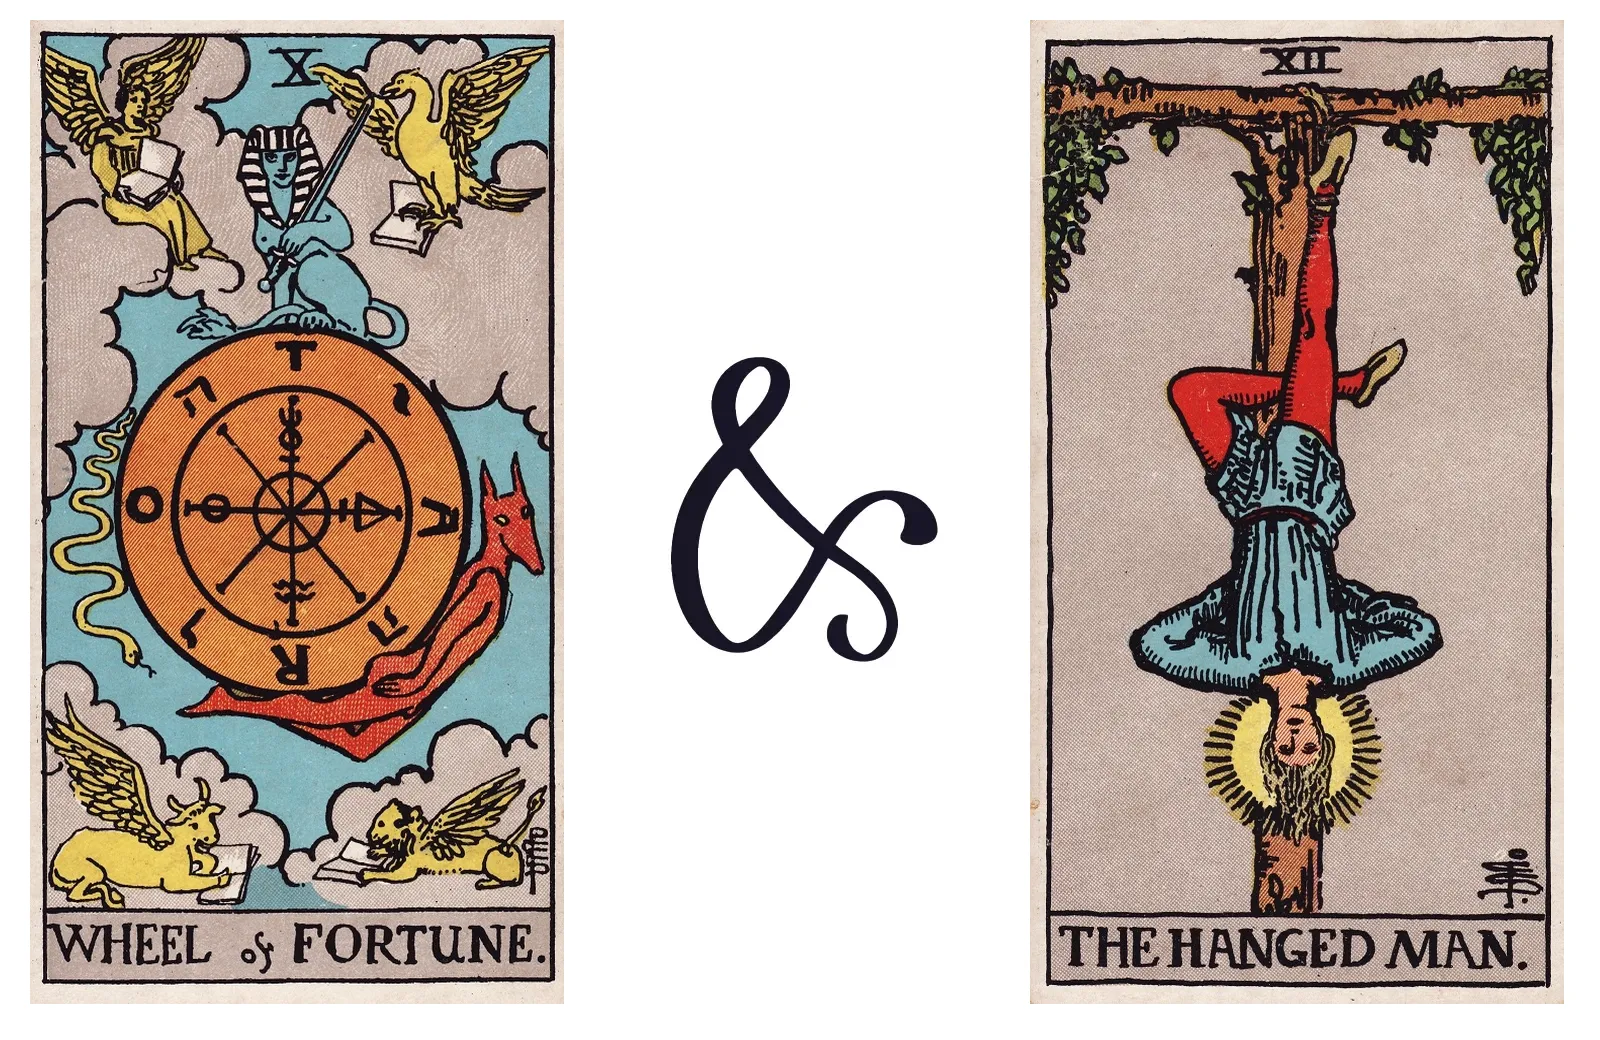 Wheel of Fortune and The Hanged Man